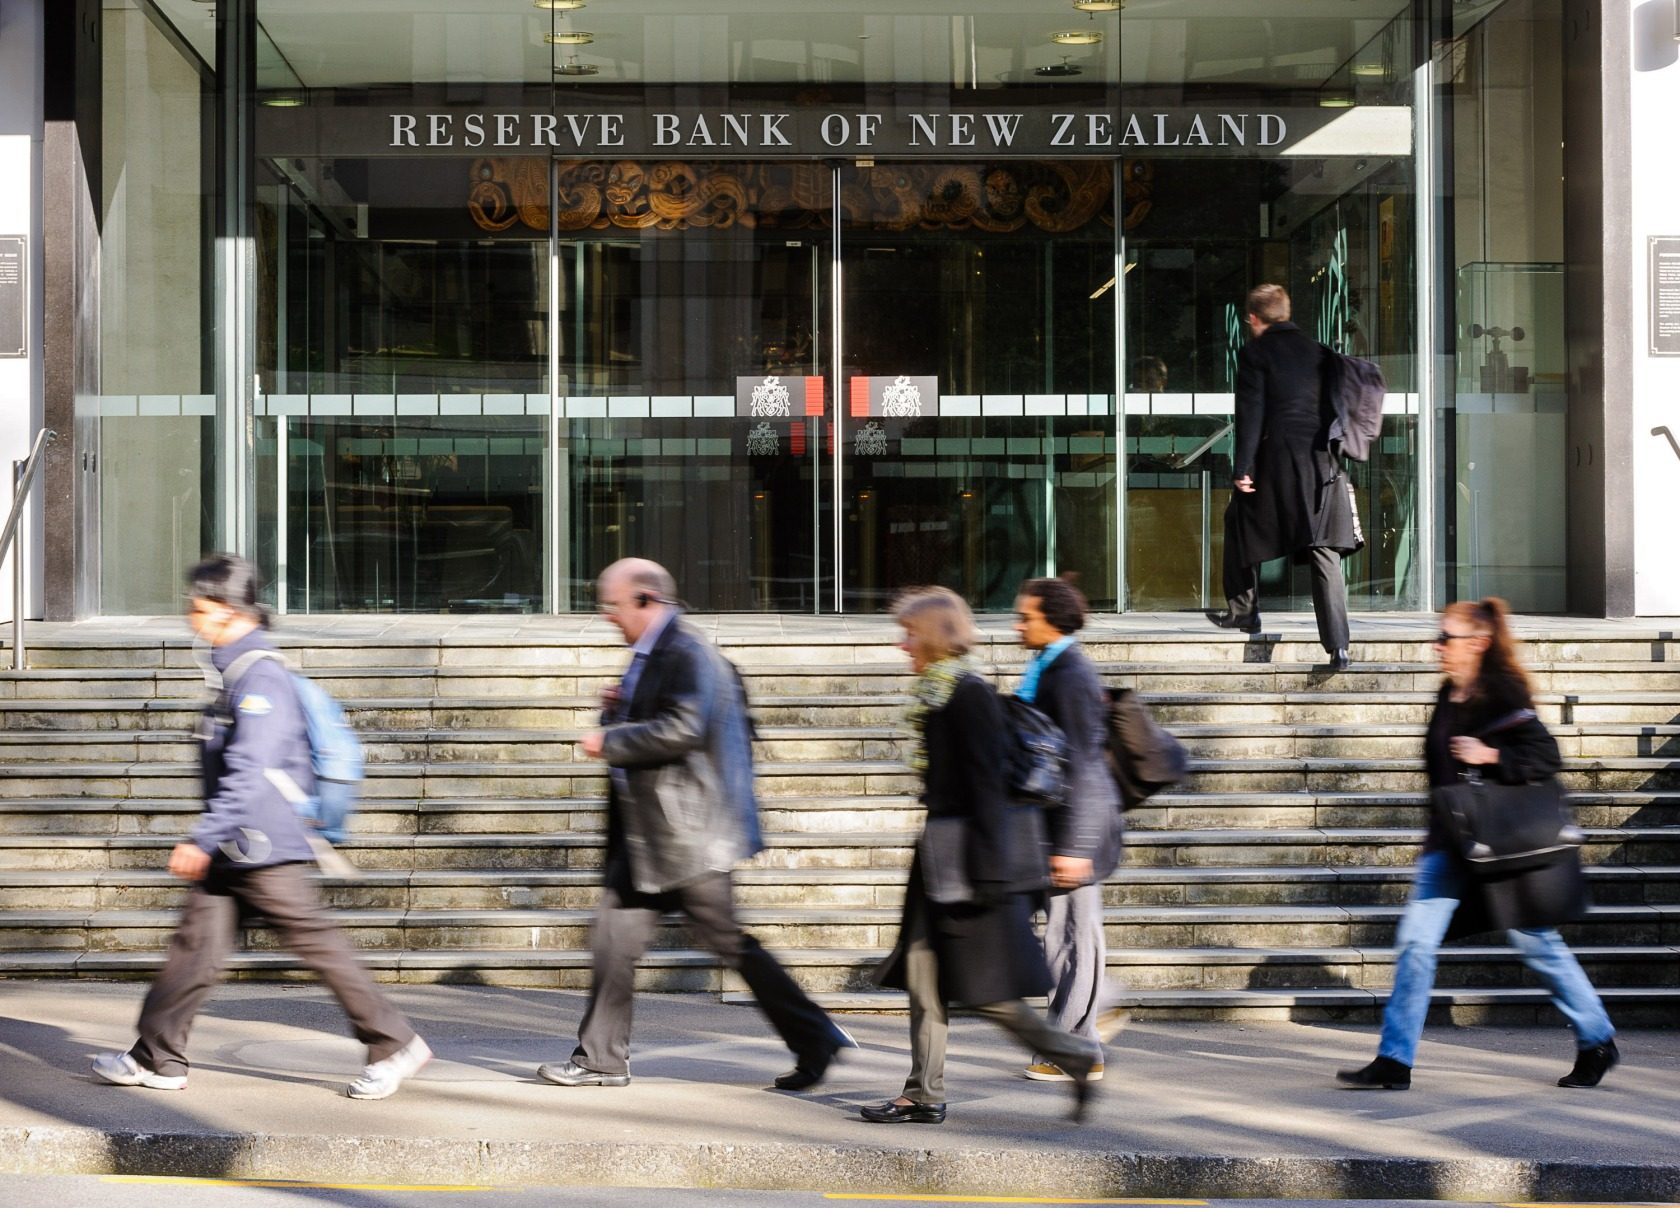 NZ sovereign wealth fund chief Adrian Orr named central bank governor